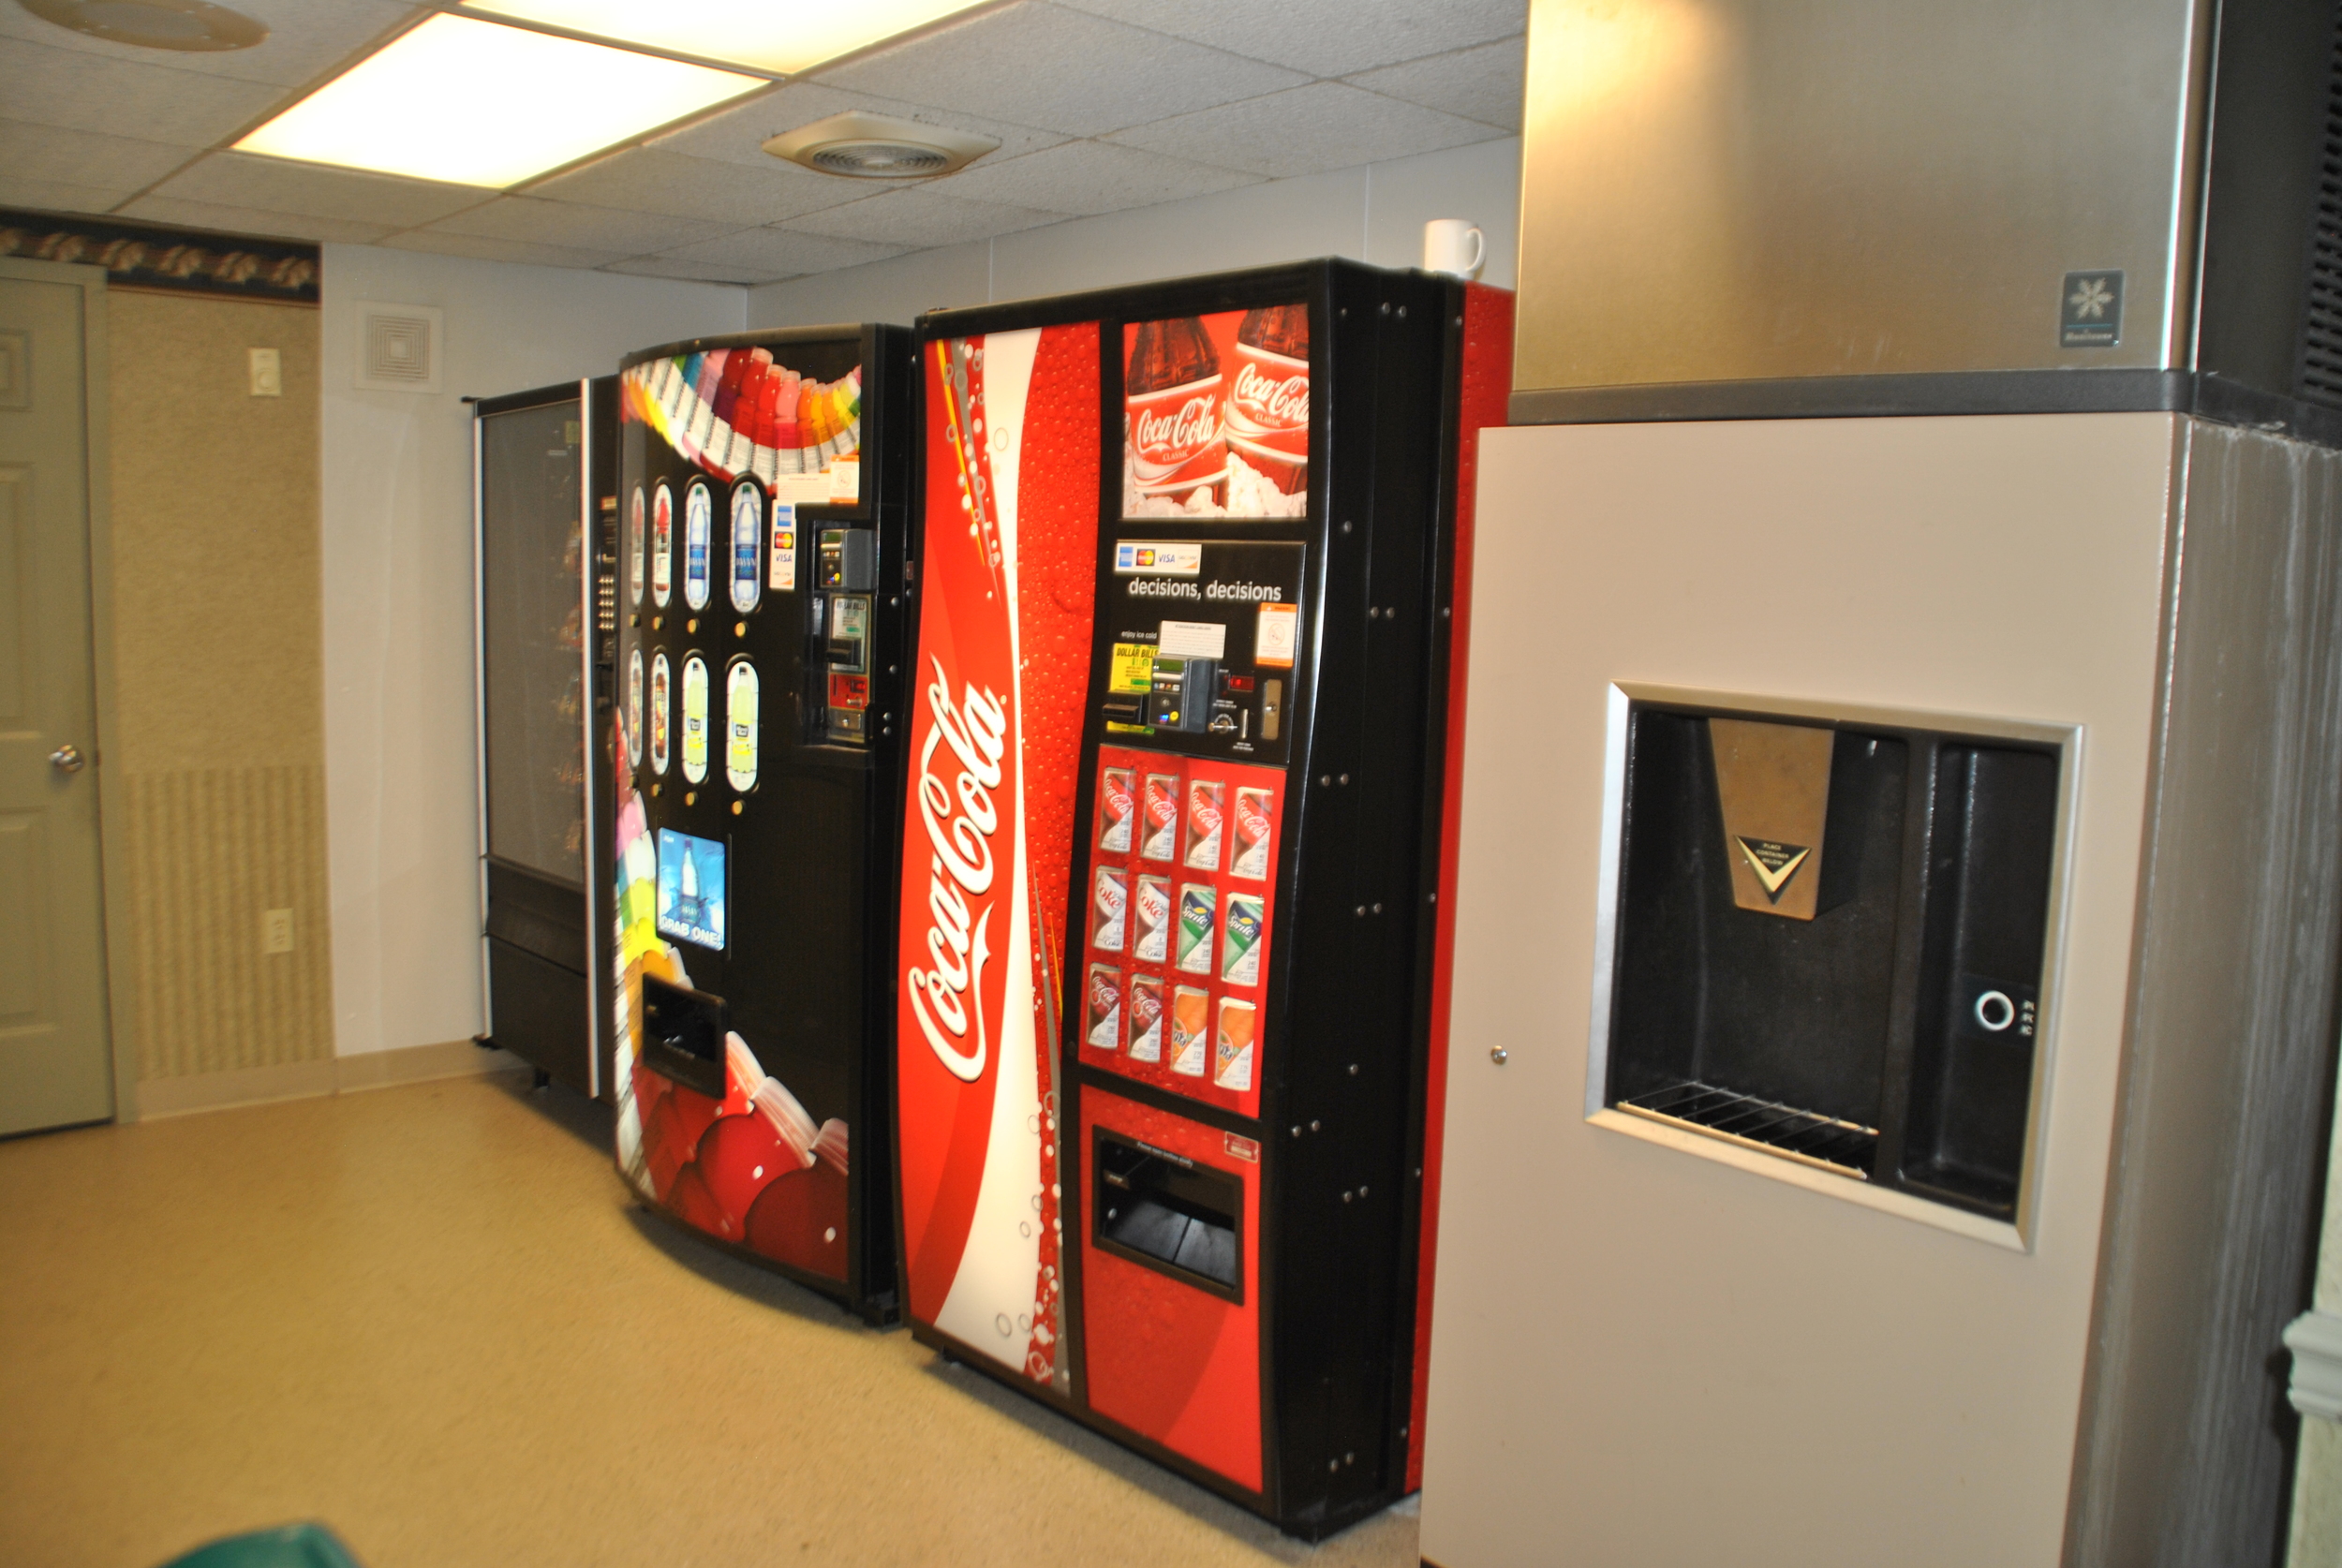 Vending and Ice Machines next to the Elevator